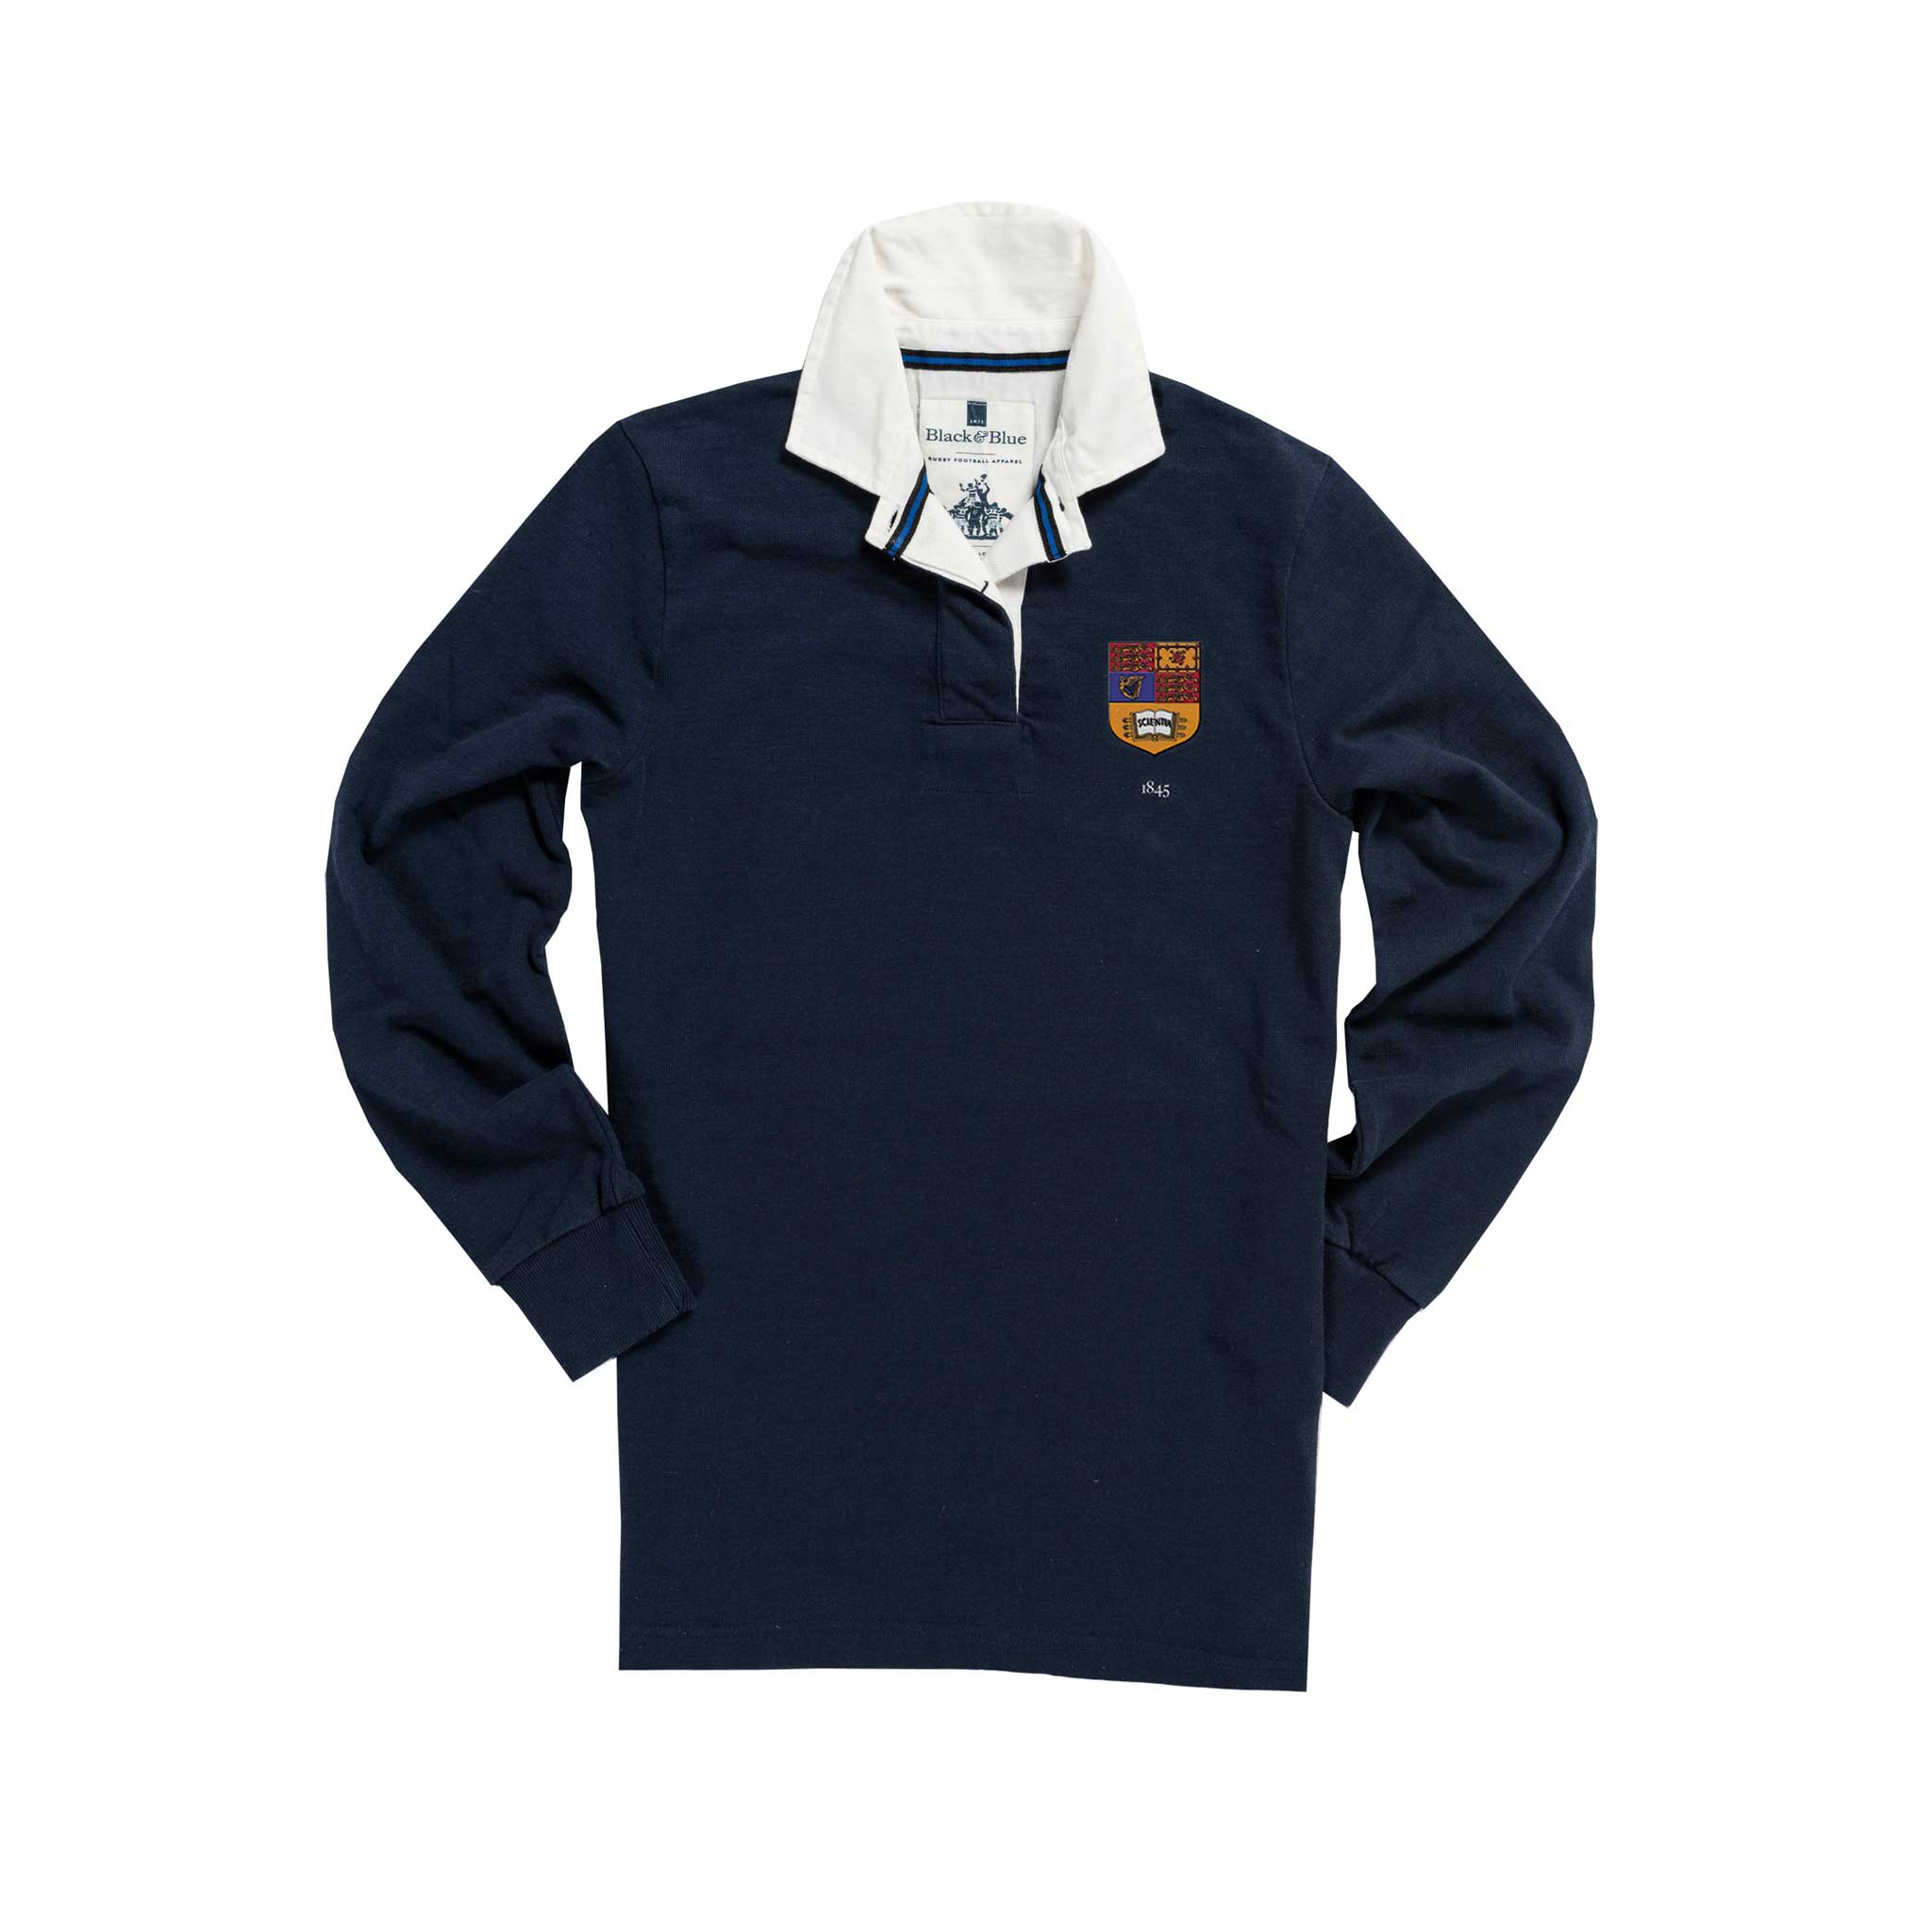 Imperial College 1845 Women's Rugby Shirt_Front